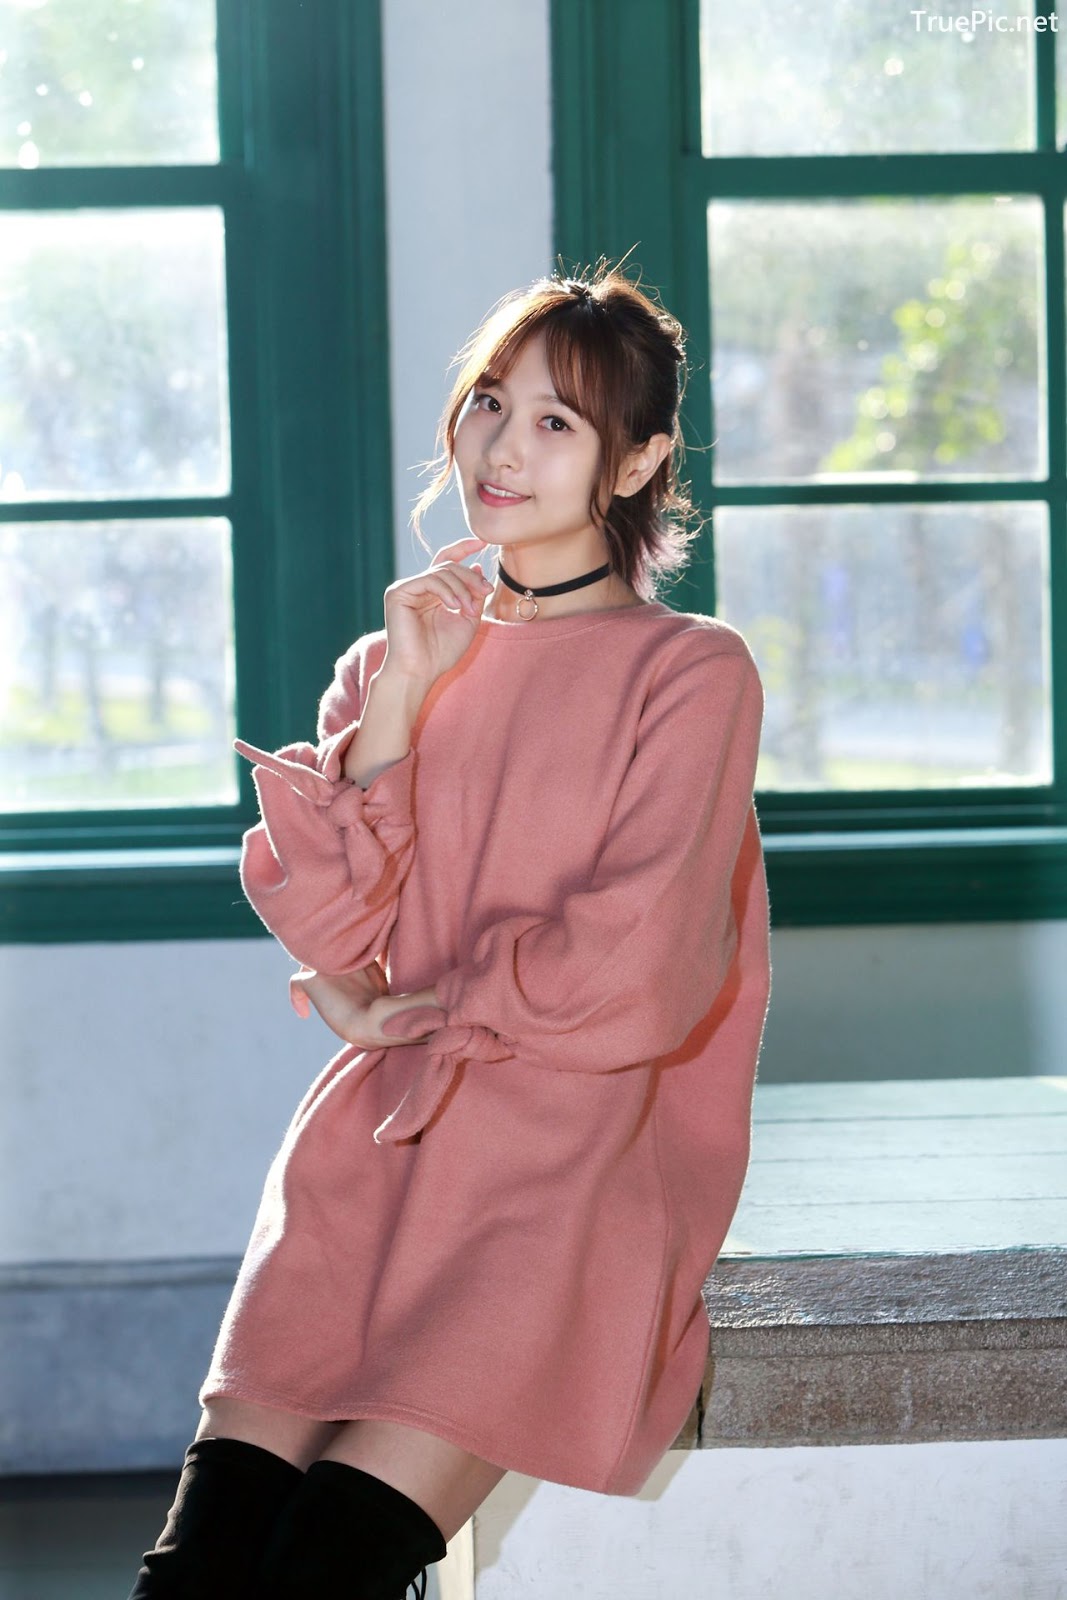 Image-Taiwanese-Model-郭思敏-Pure-And-Gorgeous-Girl-In-Pink-Sweater-Dress-TruePic.net- Picture-11